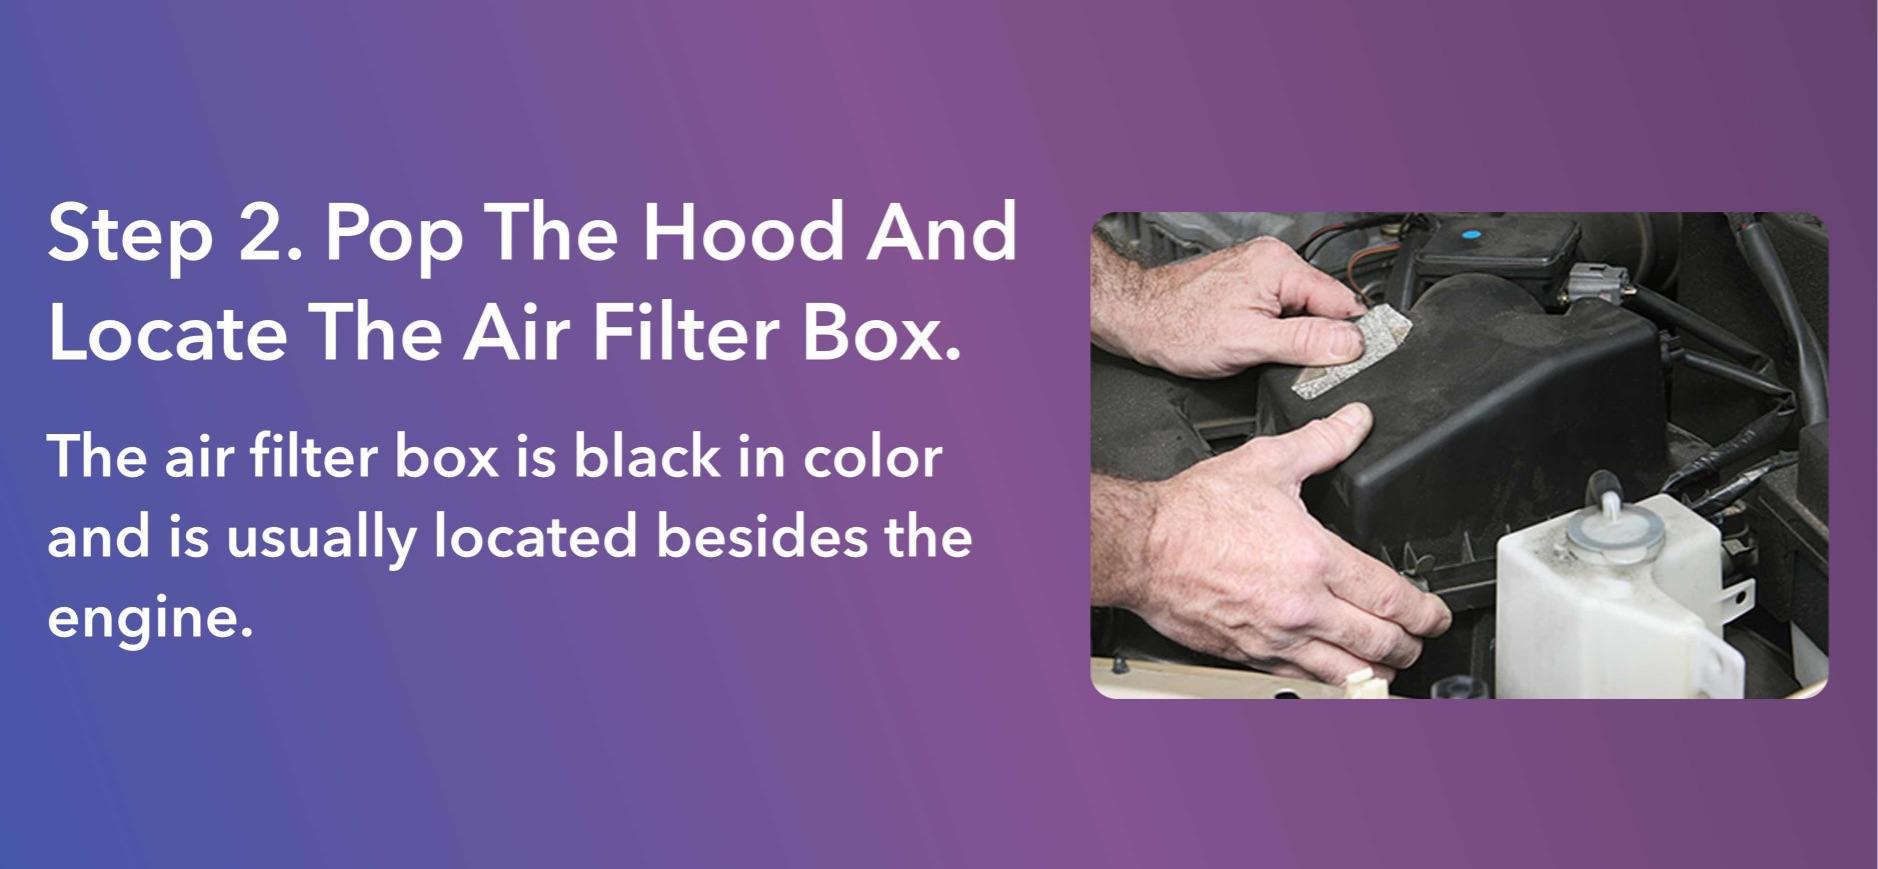 The air filter box is black in color and is usually located besides the engine.